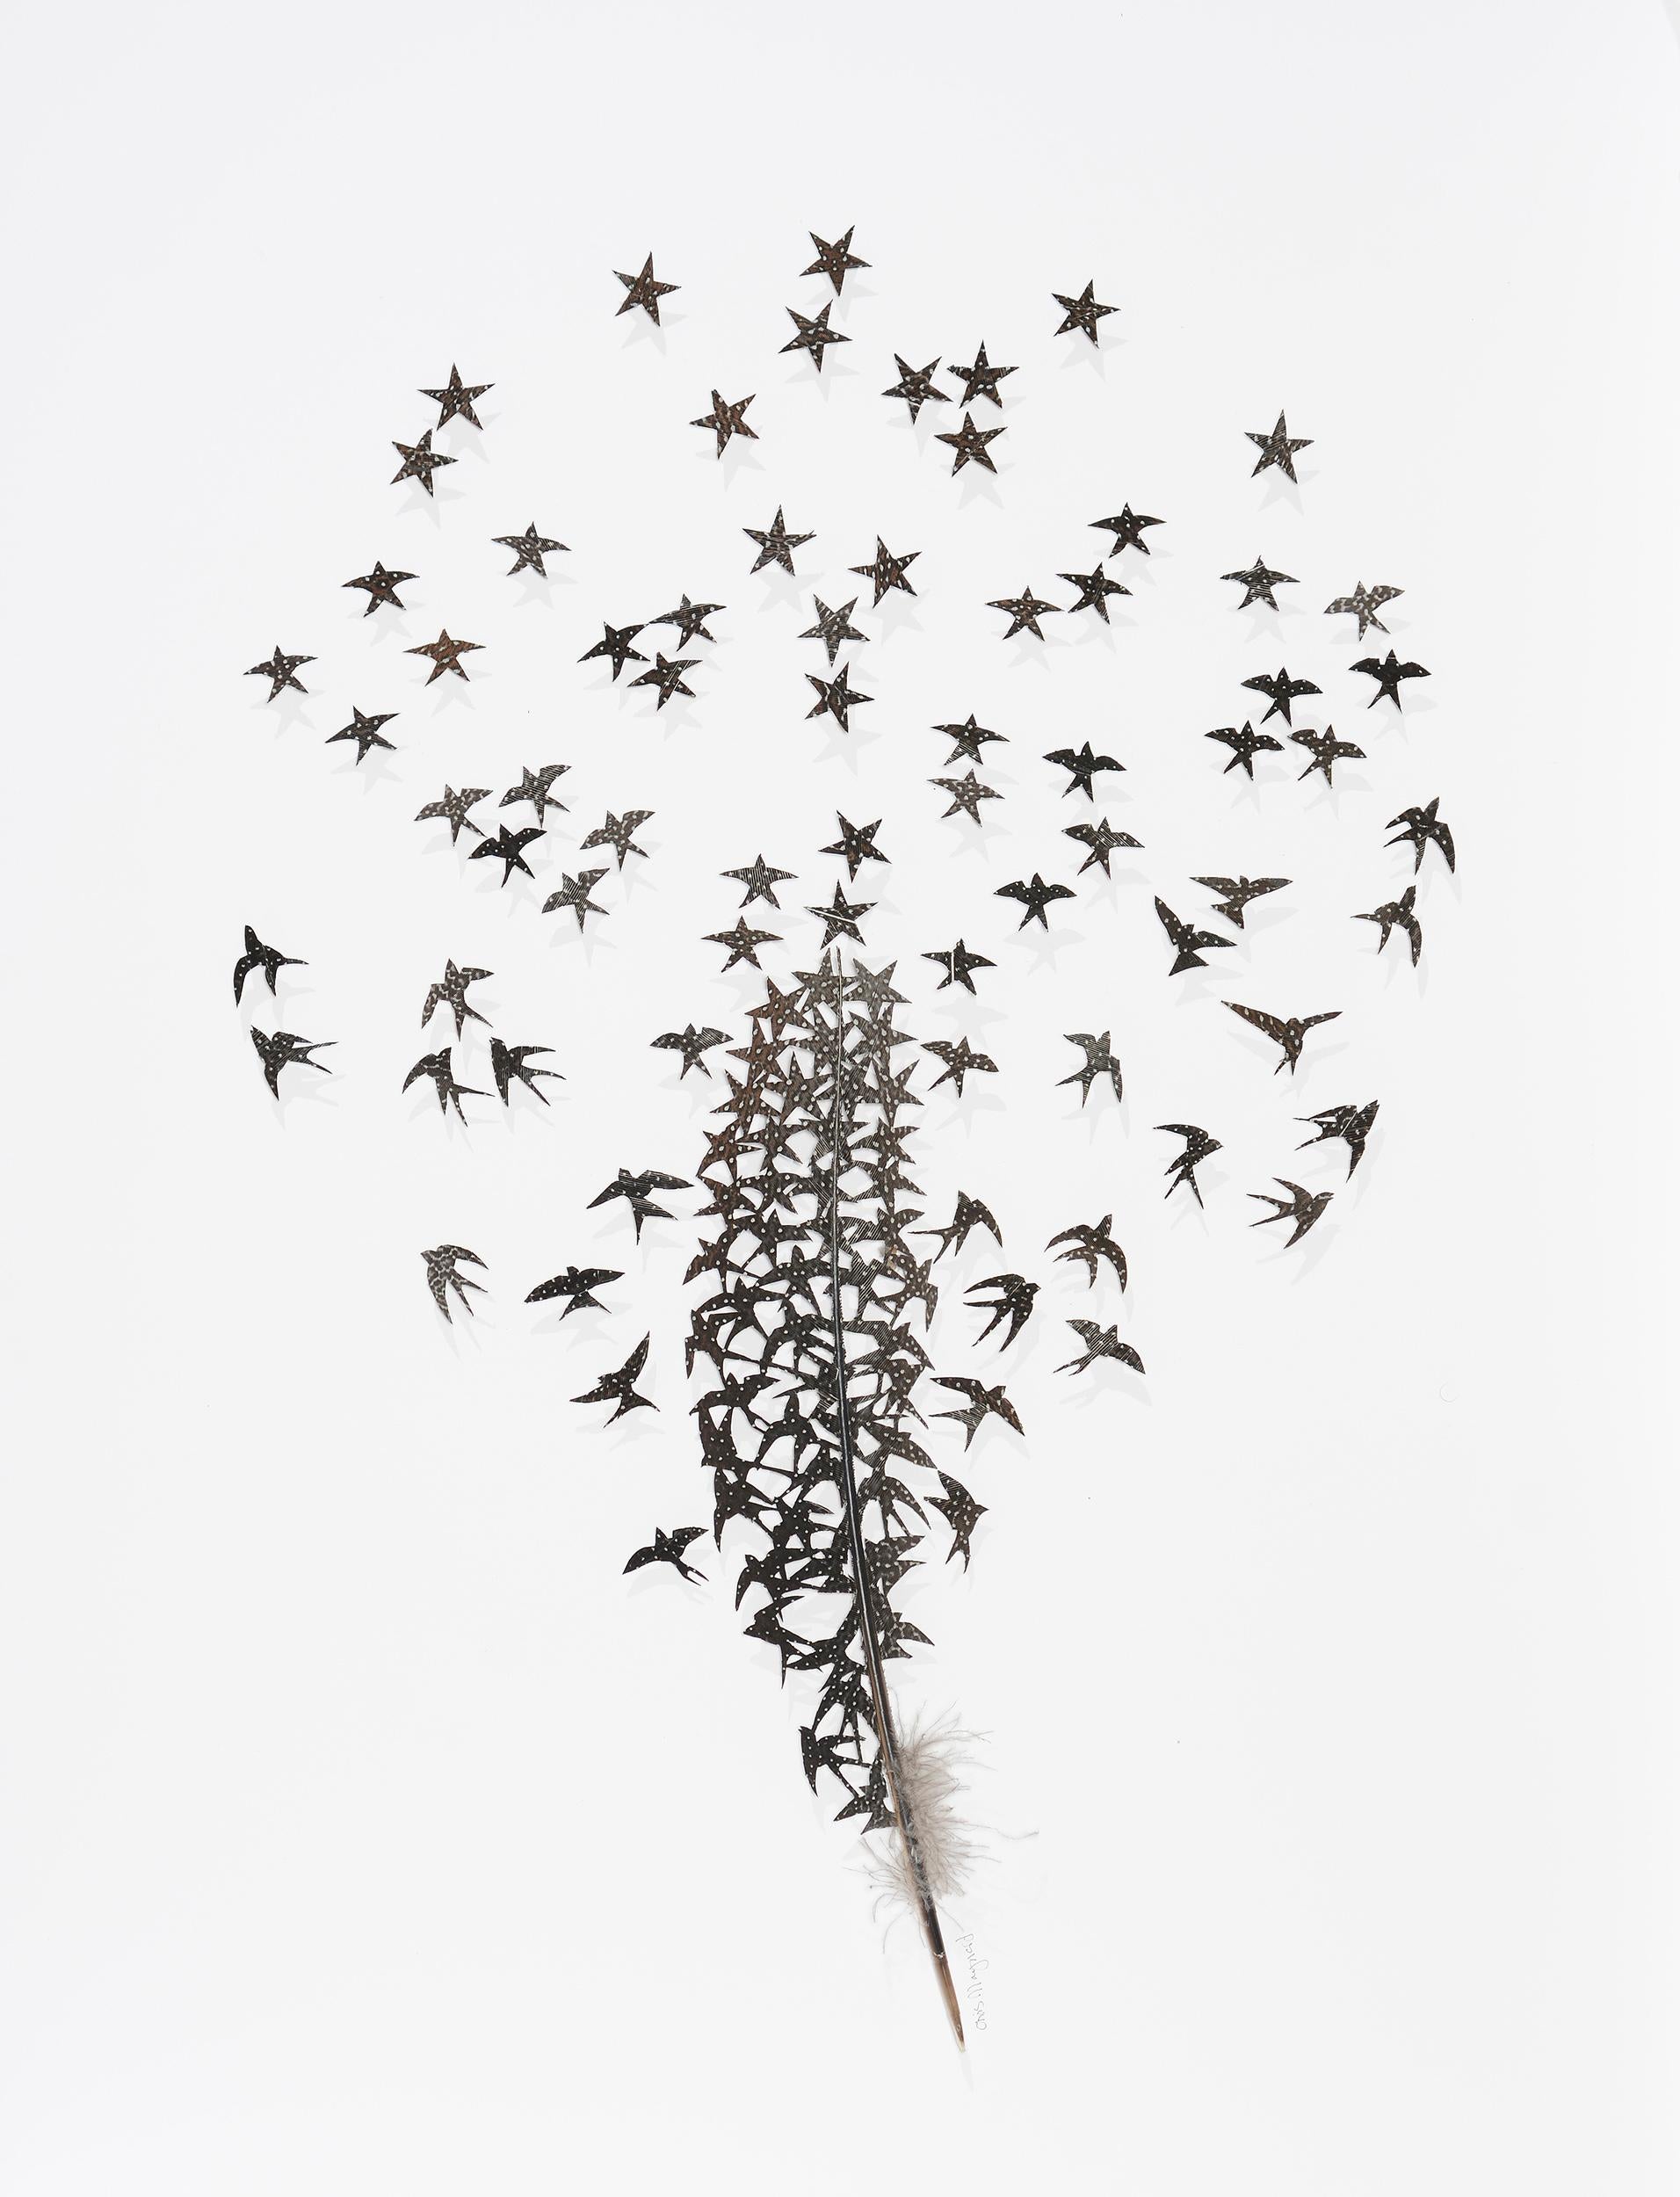 Chris Maynard Animal Art - How stars are made - black bird feather 3D whimsical poetic collage on paper 